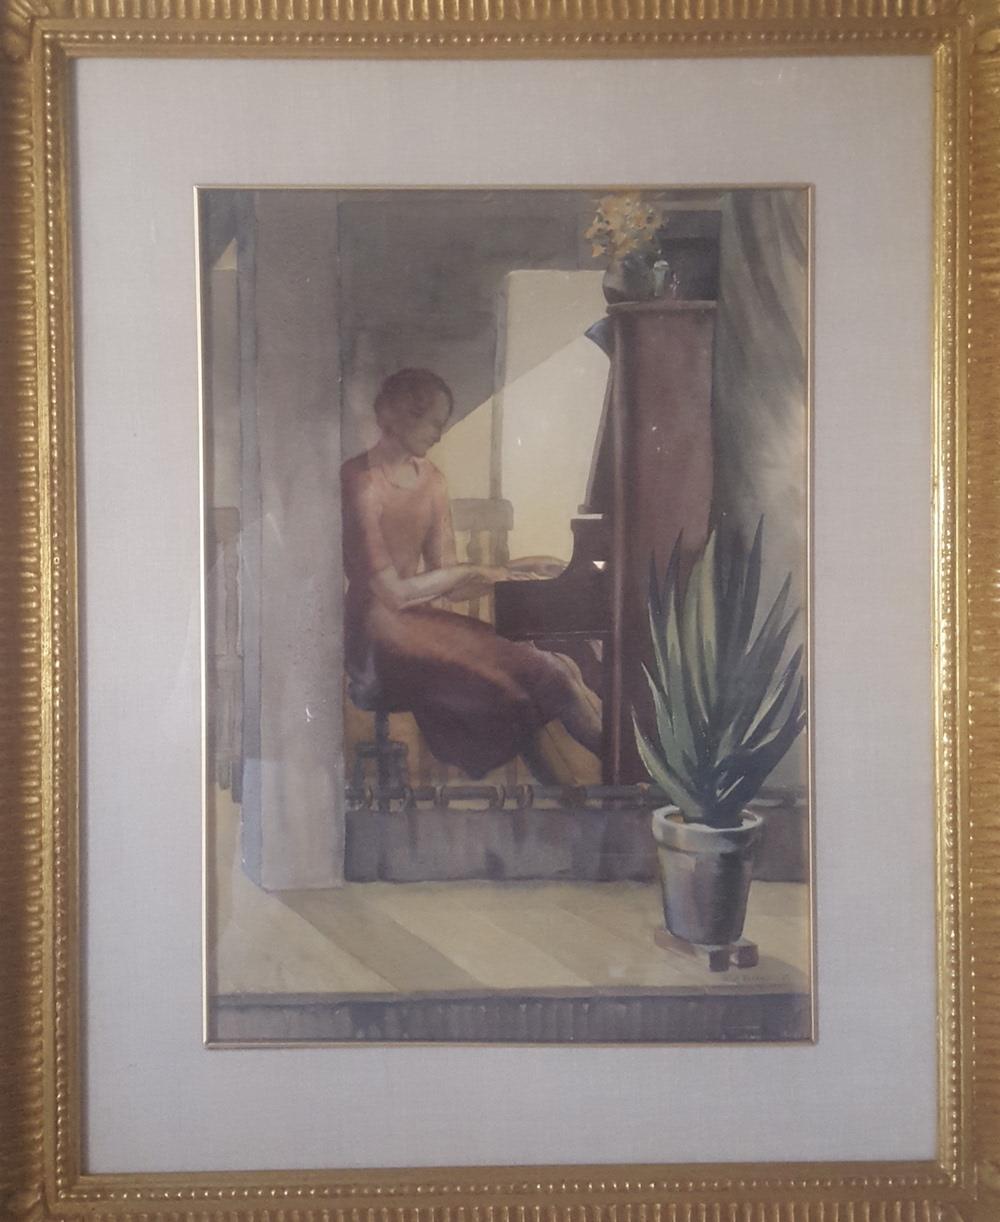 This watercolor painting is signed on the lower right in pencil, W. J. Eckert '37. I purchased this painting in 1990 from a gallery in Santa Monica, California. It had recently been framed by the gallery in it's current, metal leaf frame and it